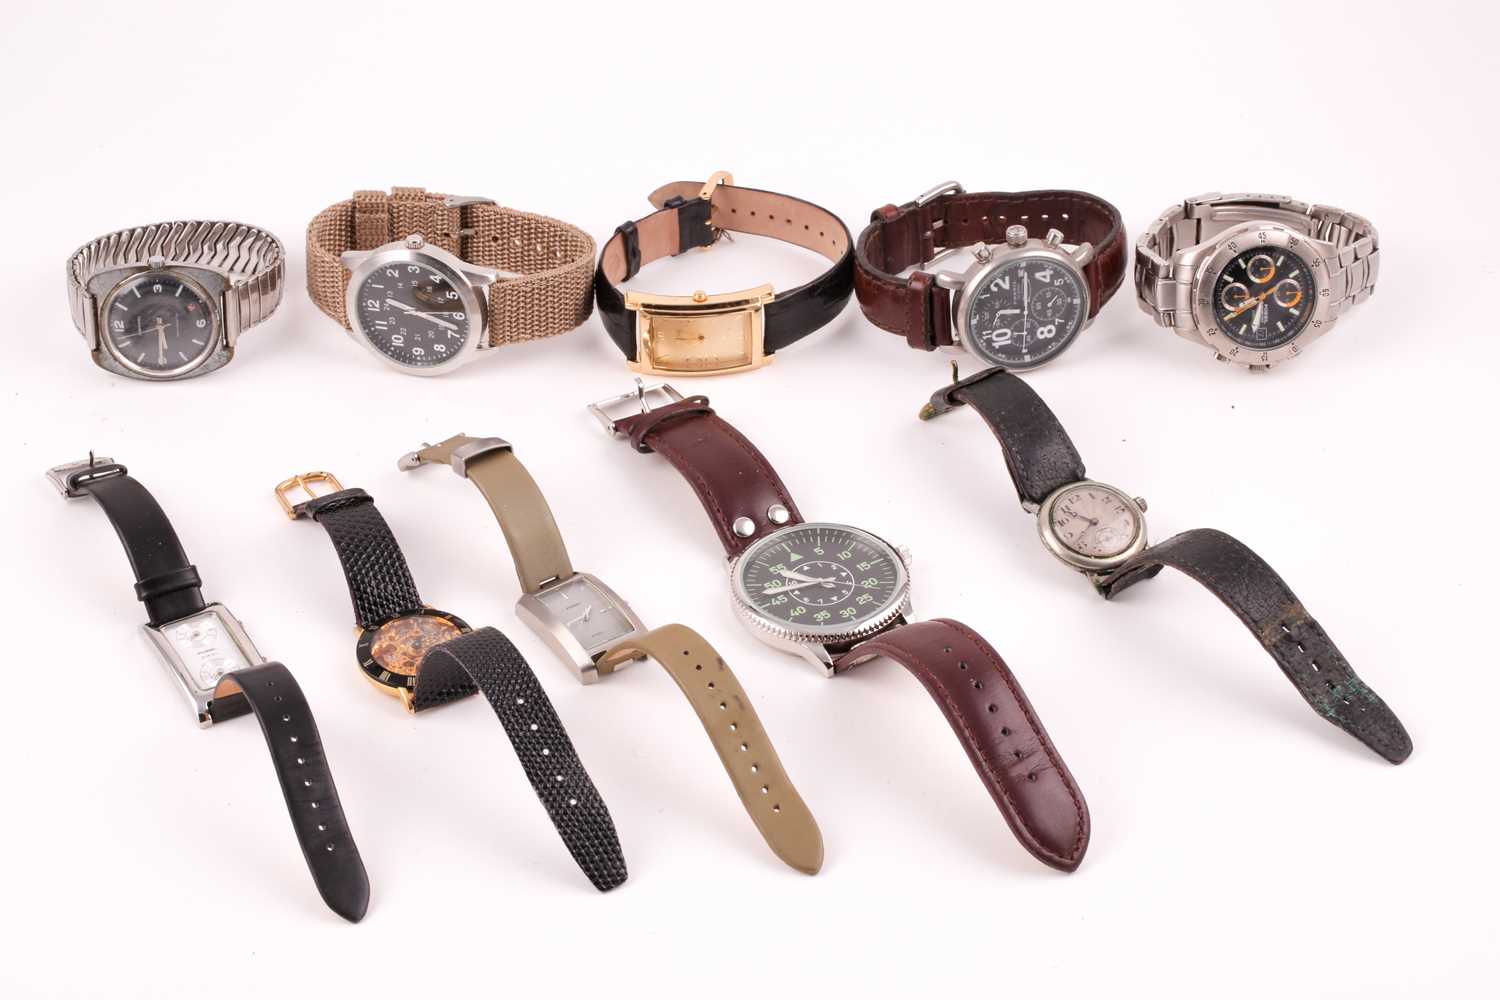 A group of ten assorted wristwatches, including watches by Fossil, Ingersoll, and others. (10)